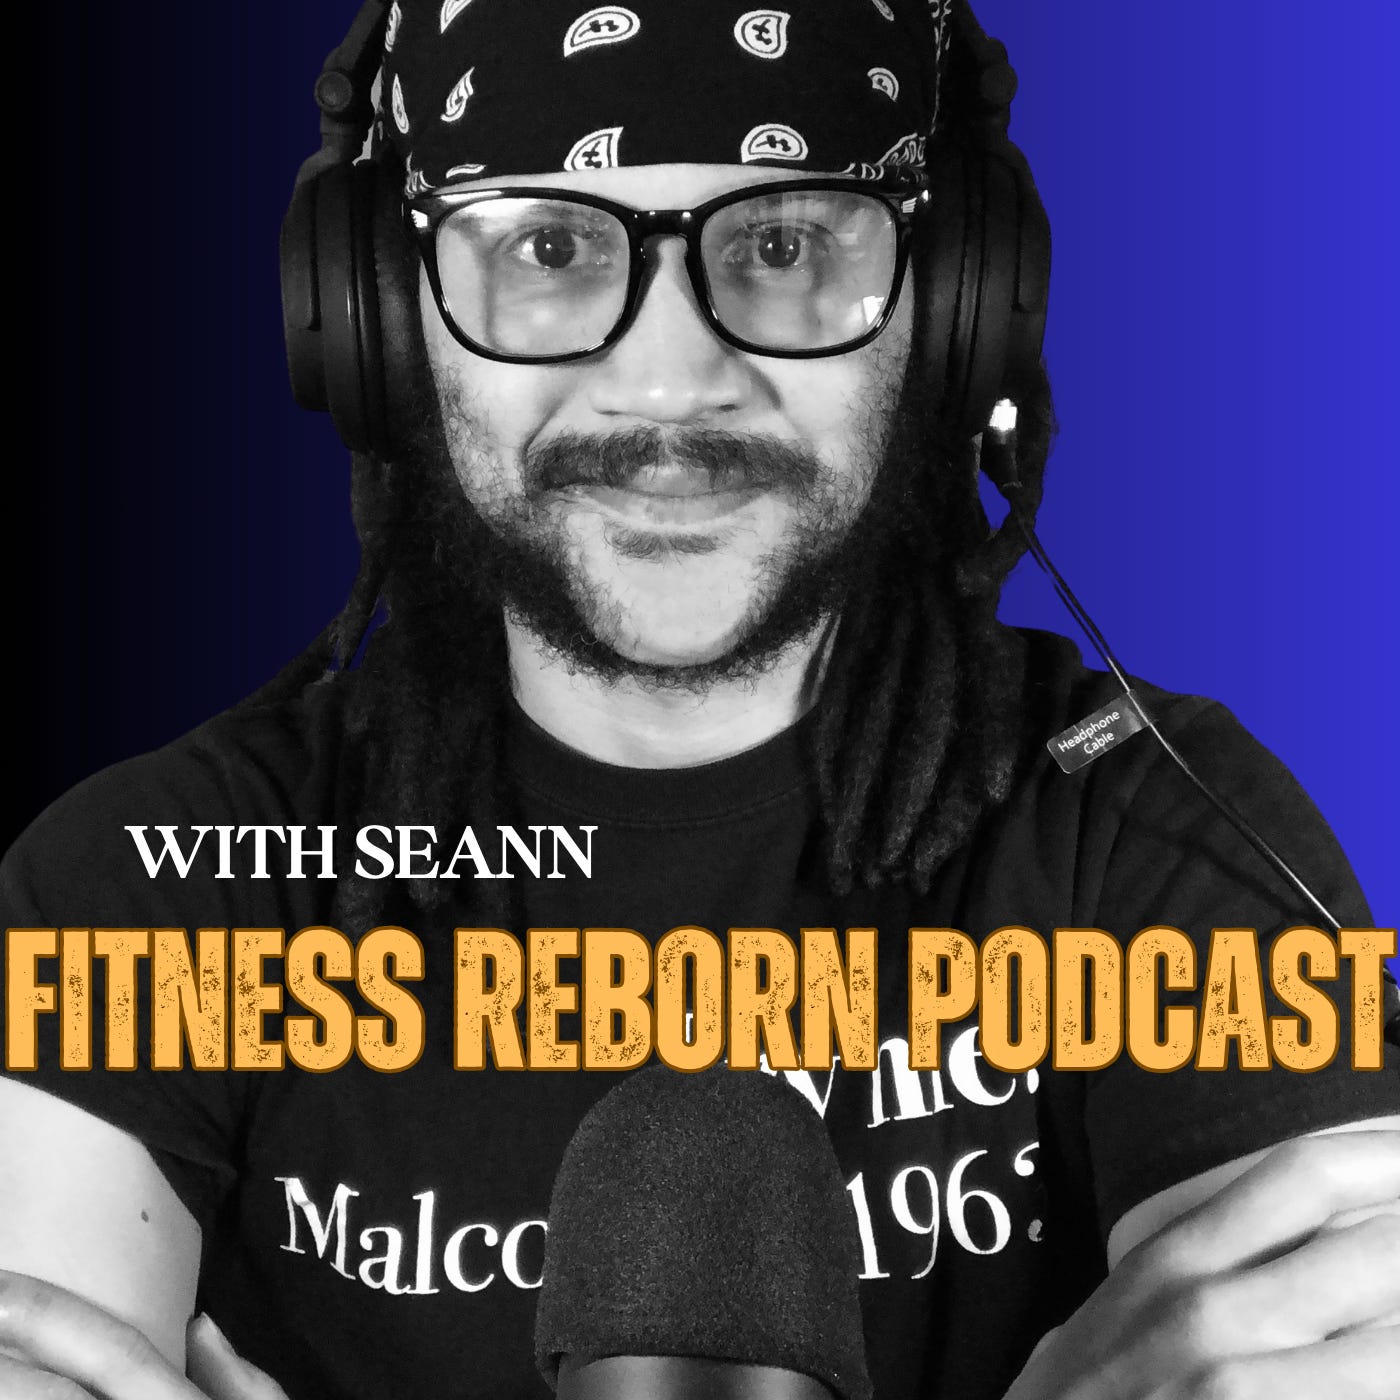 Fitness Reborn with Seann, E95: The Art of Fitness with Nancy Marks